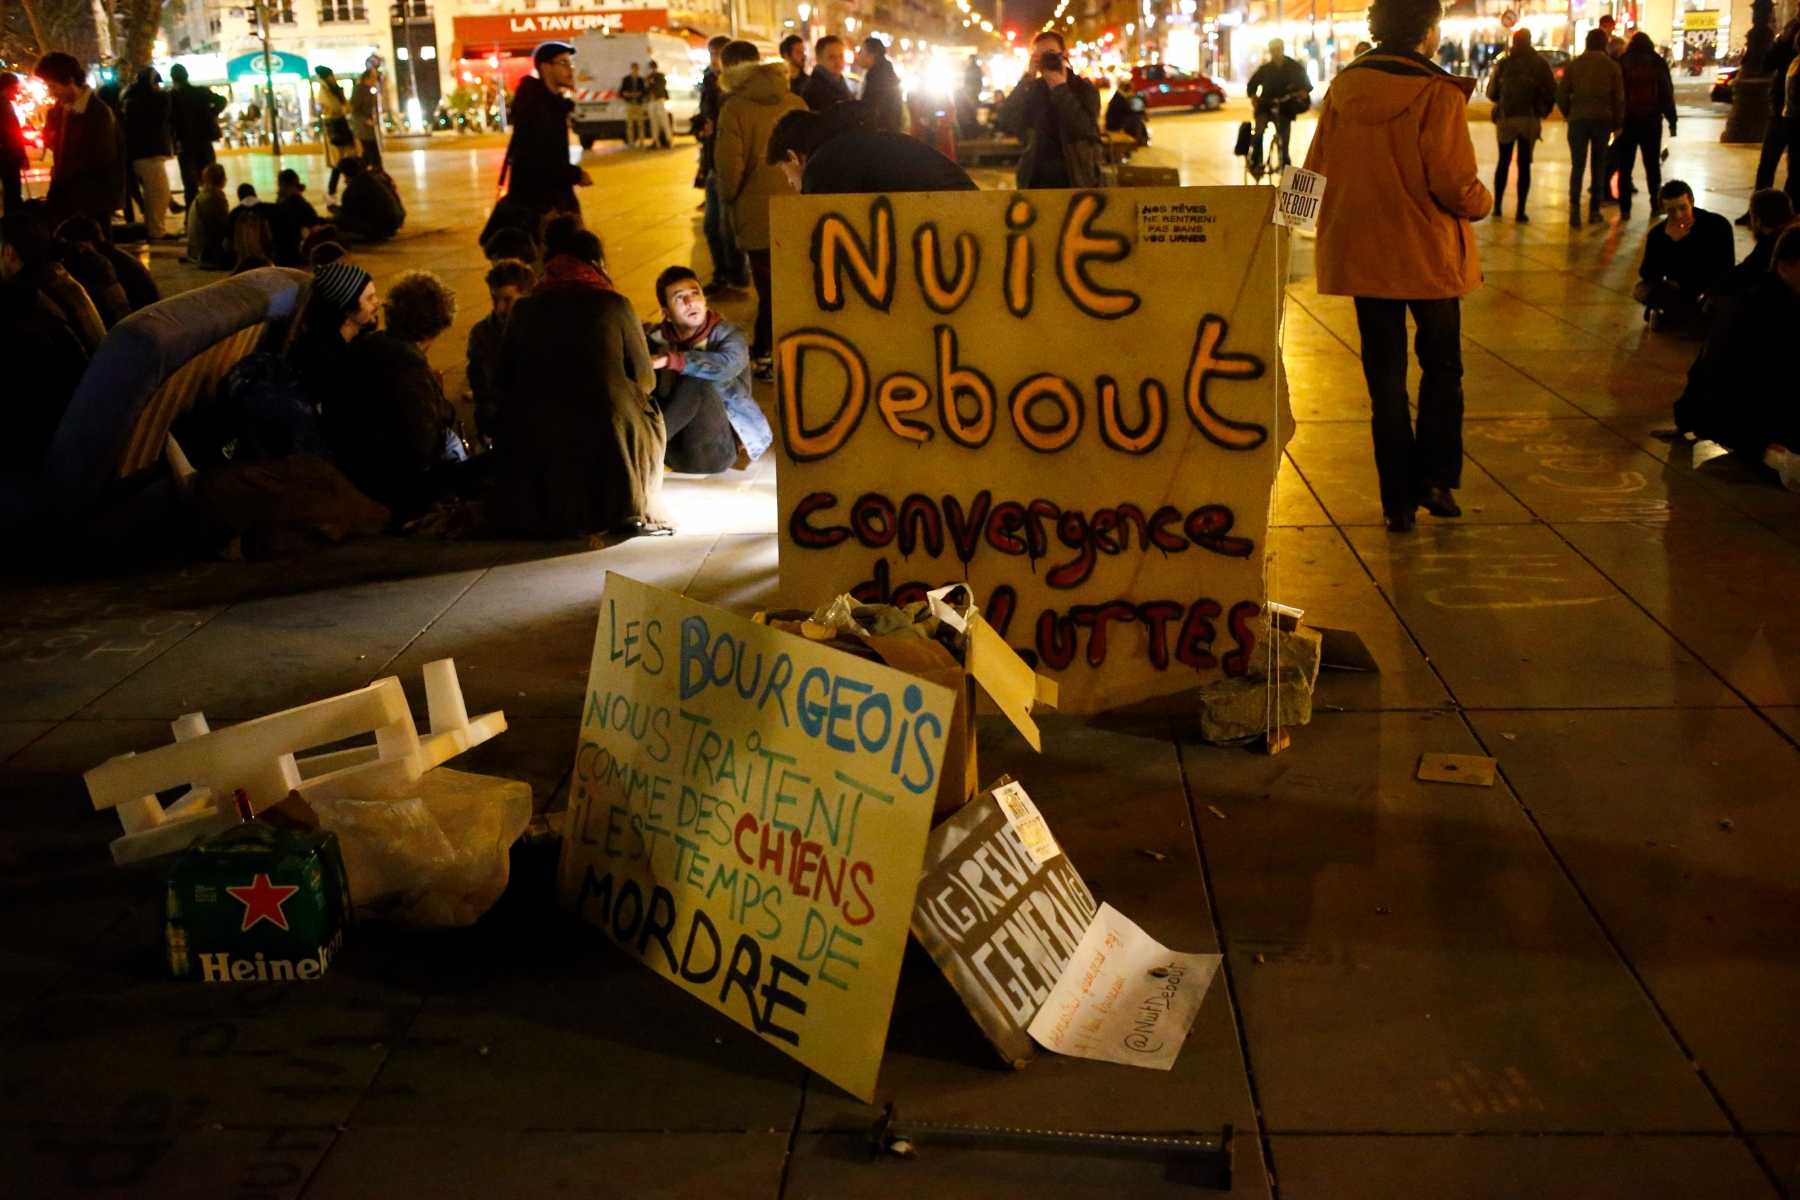 People gather near a banner reading"Nuit Debout" or "Rise up at Night," "The conservative bourgeois treat us like dogs, it is time to bite" on the Place de la Republique in Paris, France, Monday, April 4, 2016. A few hundred protesters have been camping out, holding night-time demonstrations since last week at a symbolic rallying point on the Place de la Republique, to express anger at a proposed labor law that would extend the workweek and make layoffs easier. The social media-driven movement, called "Nuit Debout" or "Rise up at Night," sprang from nationwide strikes and protests Thursday. (AP Photo/Francois Mori) France Rise up at Night